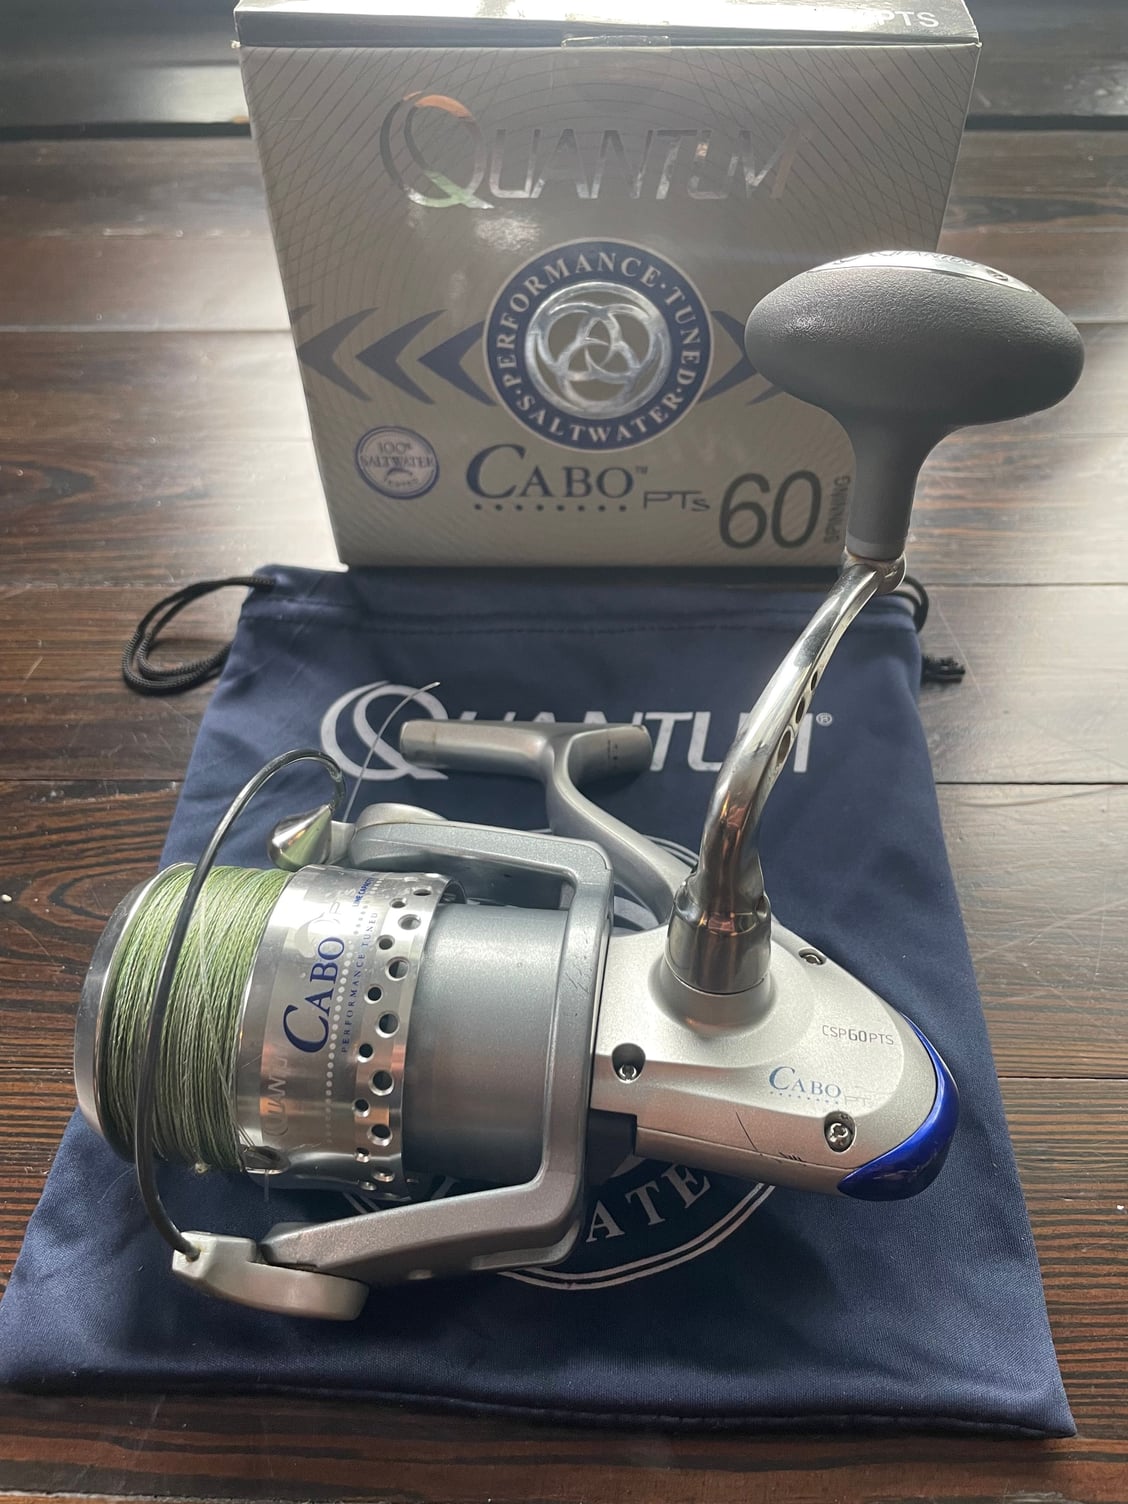 Cabo Quantum PTS60 spinning reel for sale - The Hull Truth - Boating and  Fishing Forum